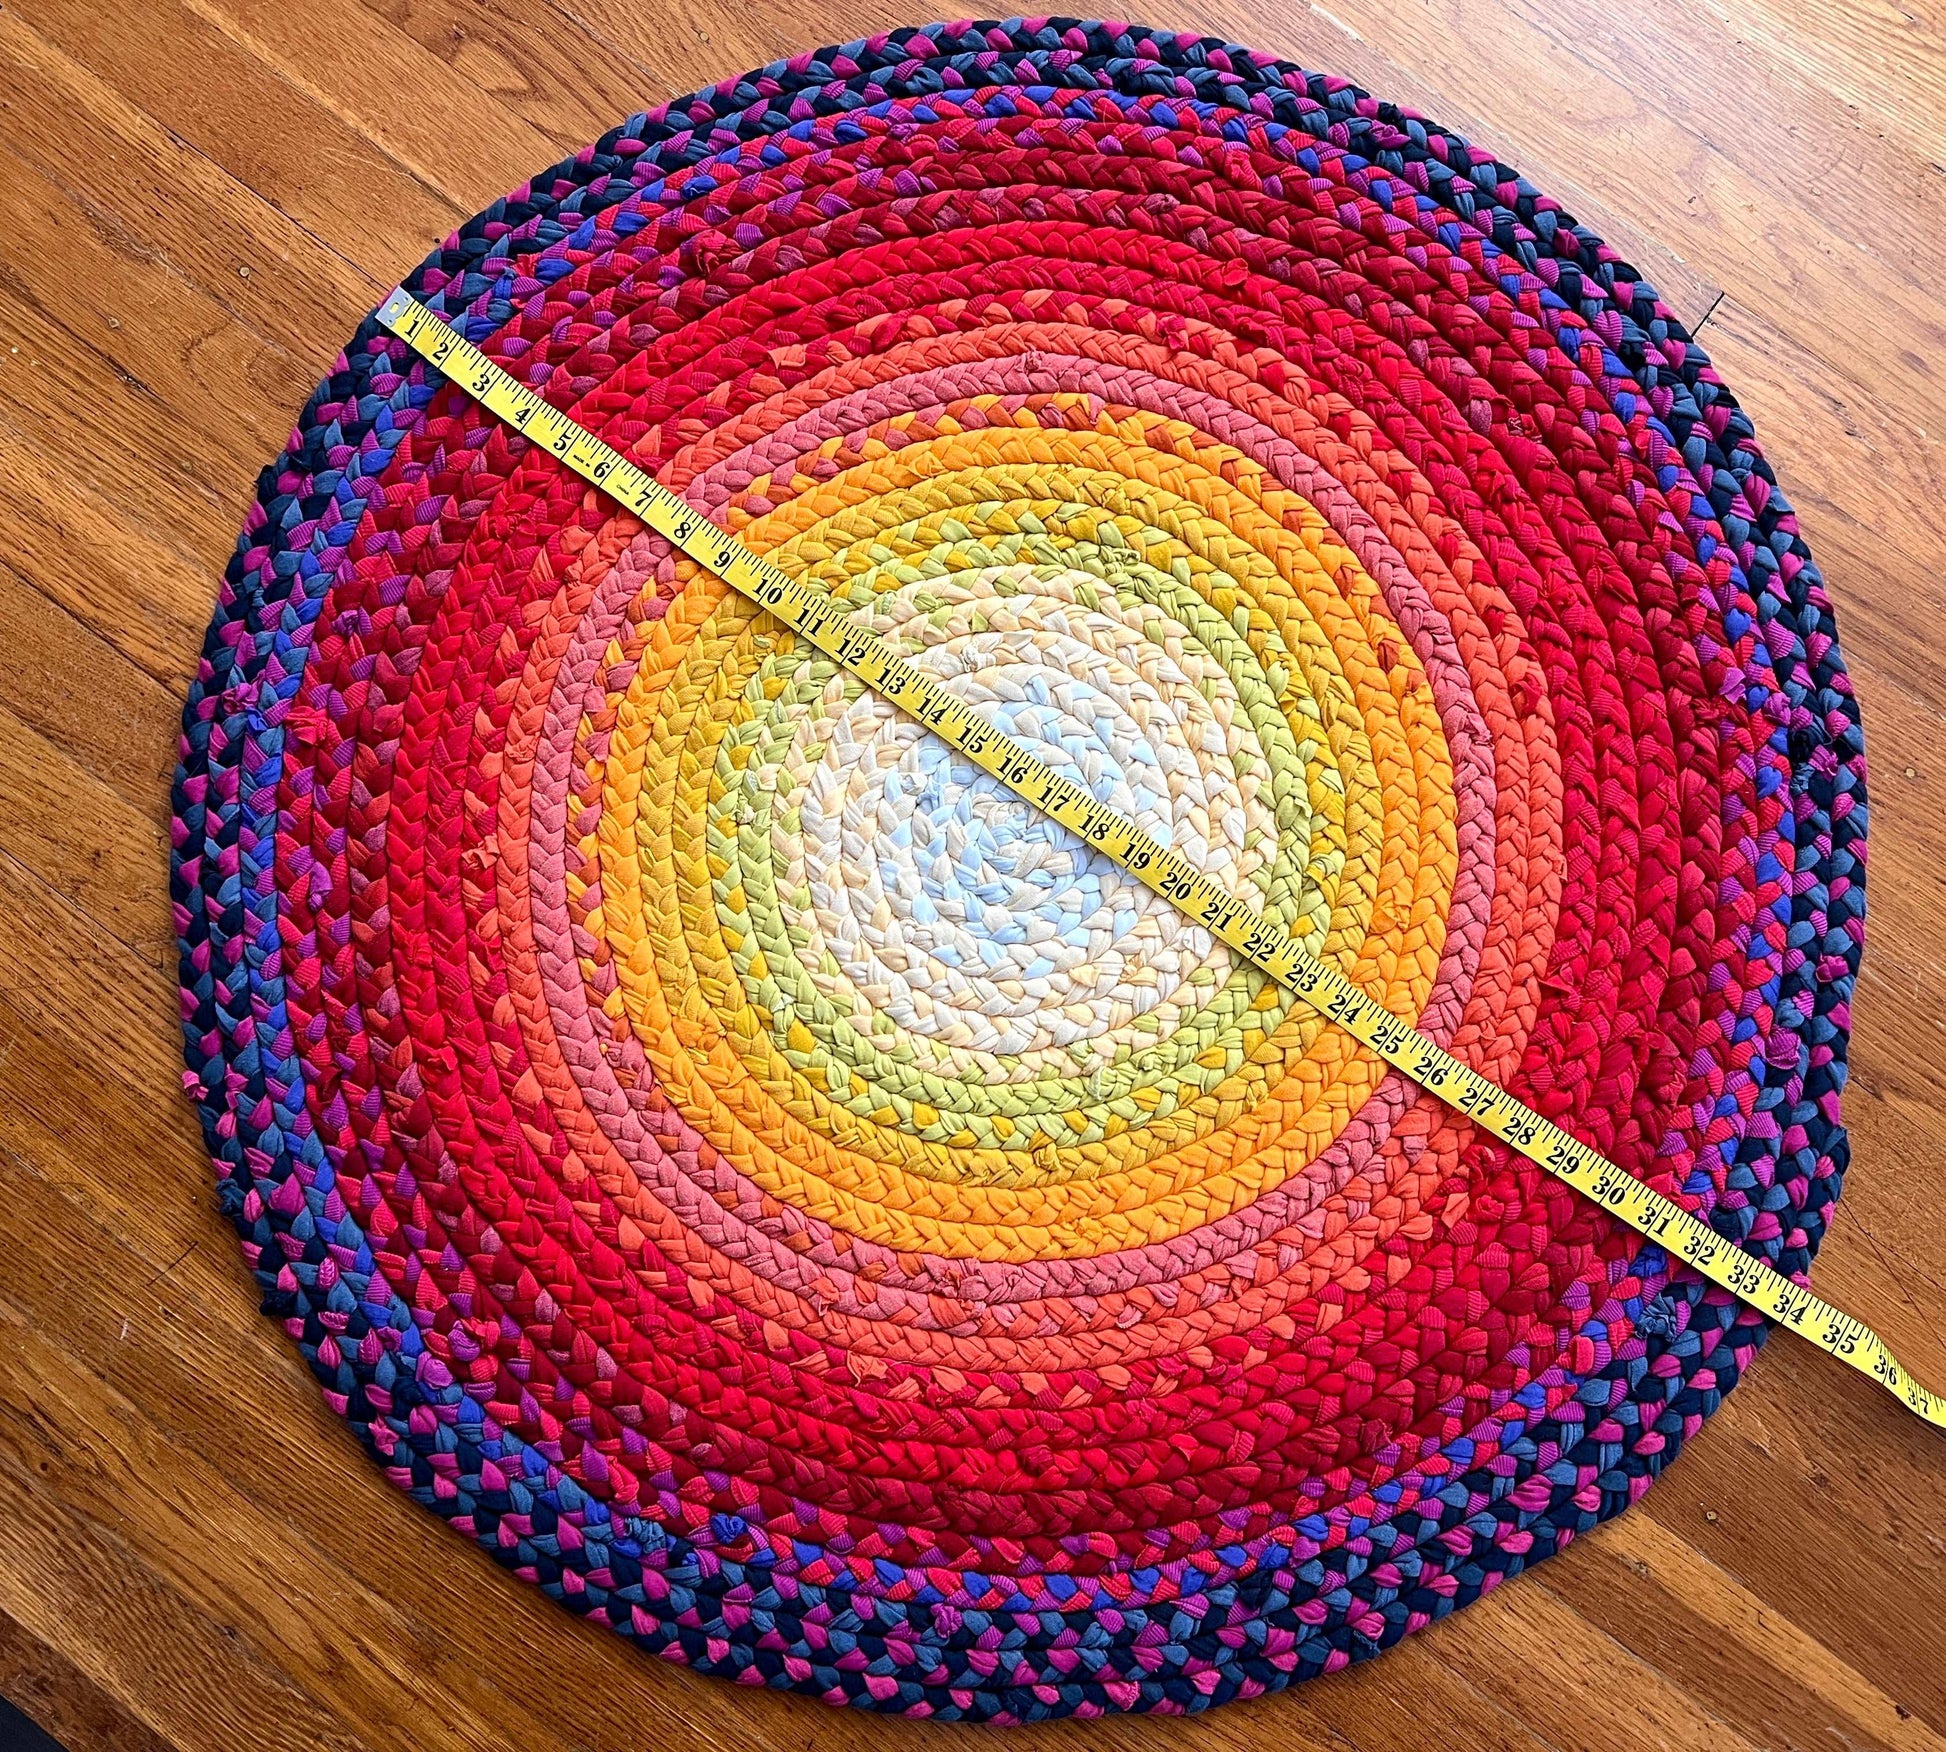 aerial view of the sunset ombré tshirt rug, with measuring tape across the top to show the diameter.